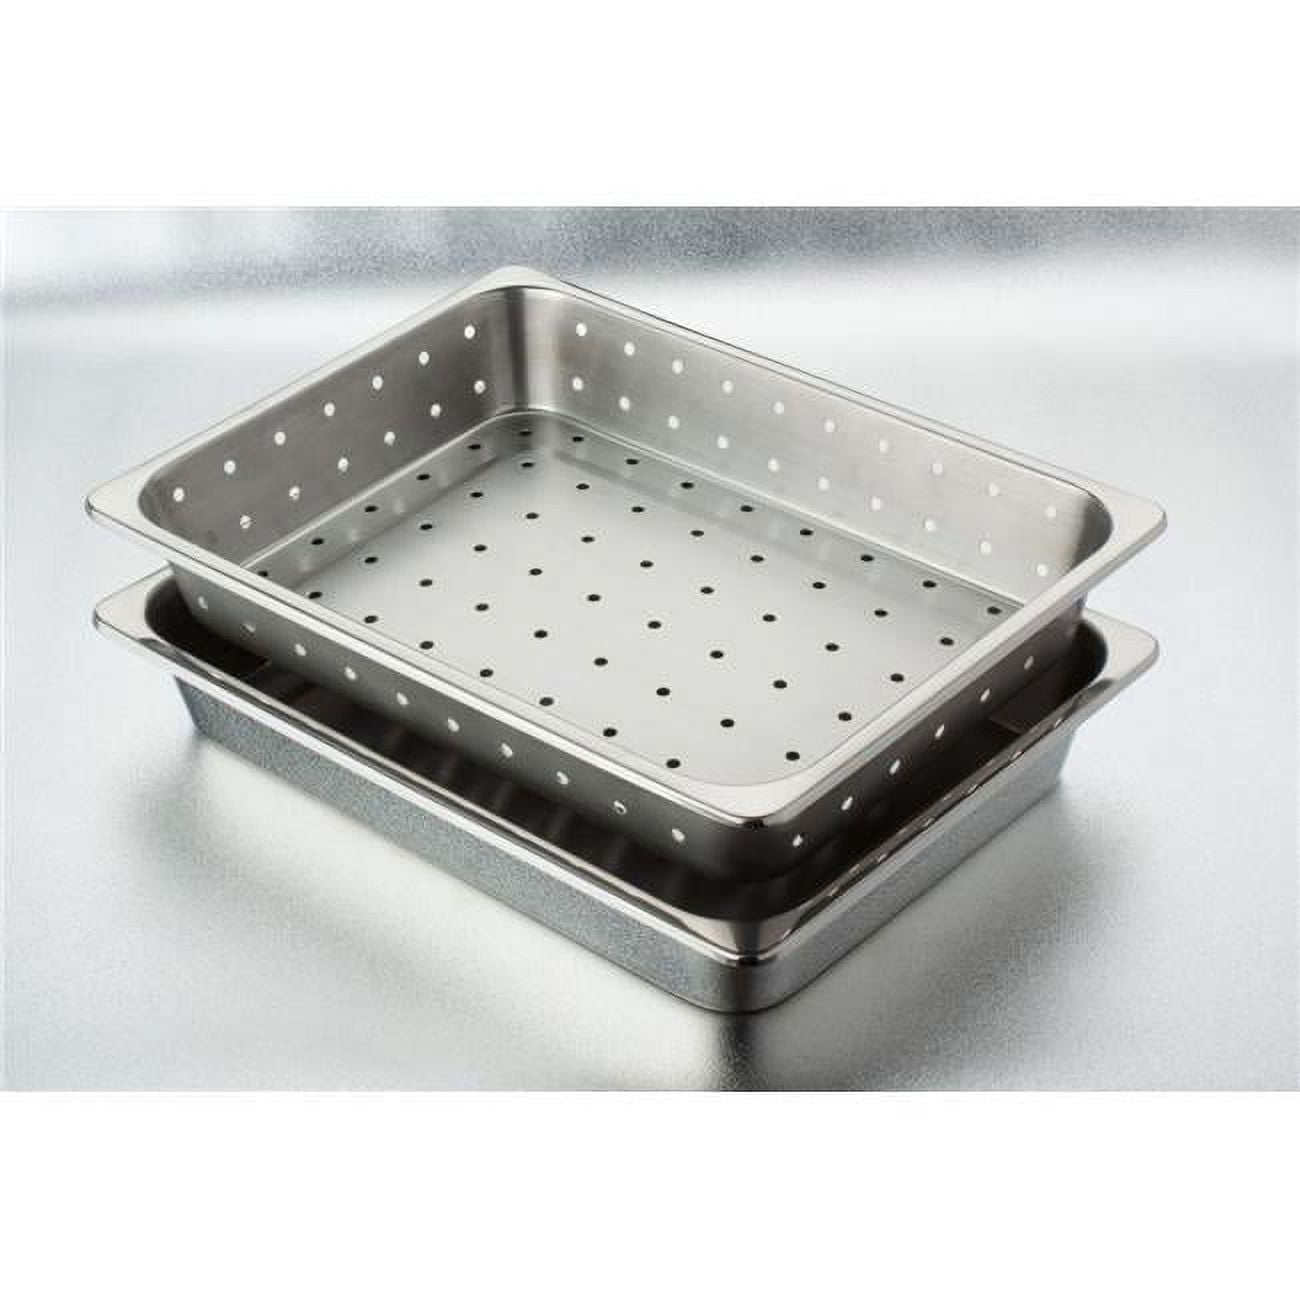 4271p Stainless Steel Perforated Insert Tray